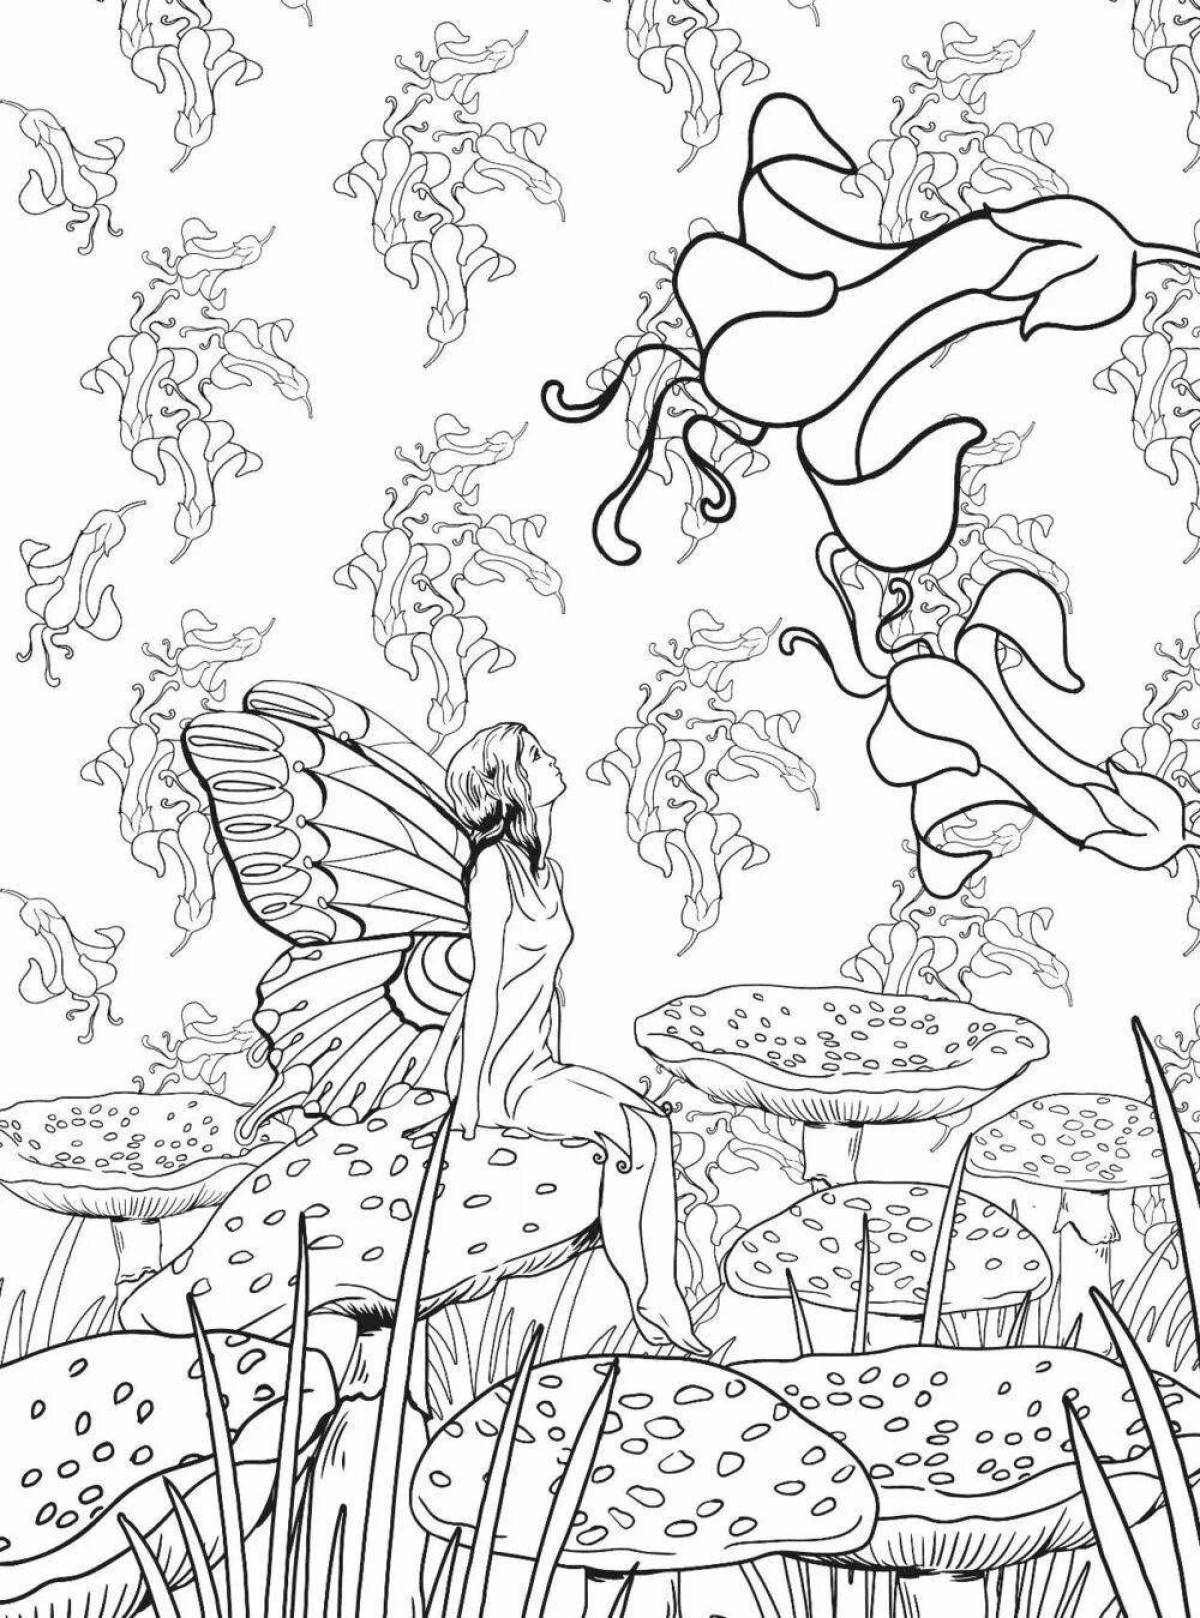 Exquisite anti-stress forest coloring book